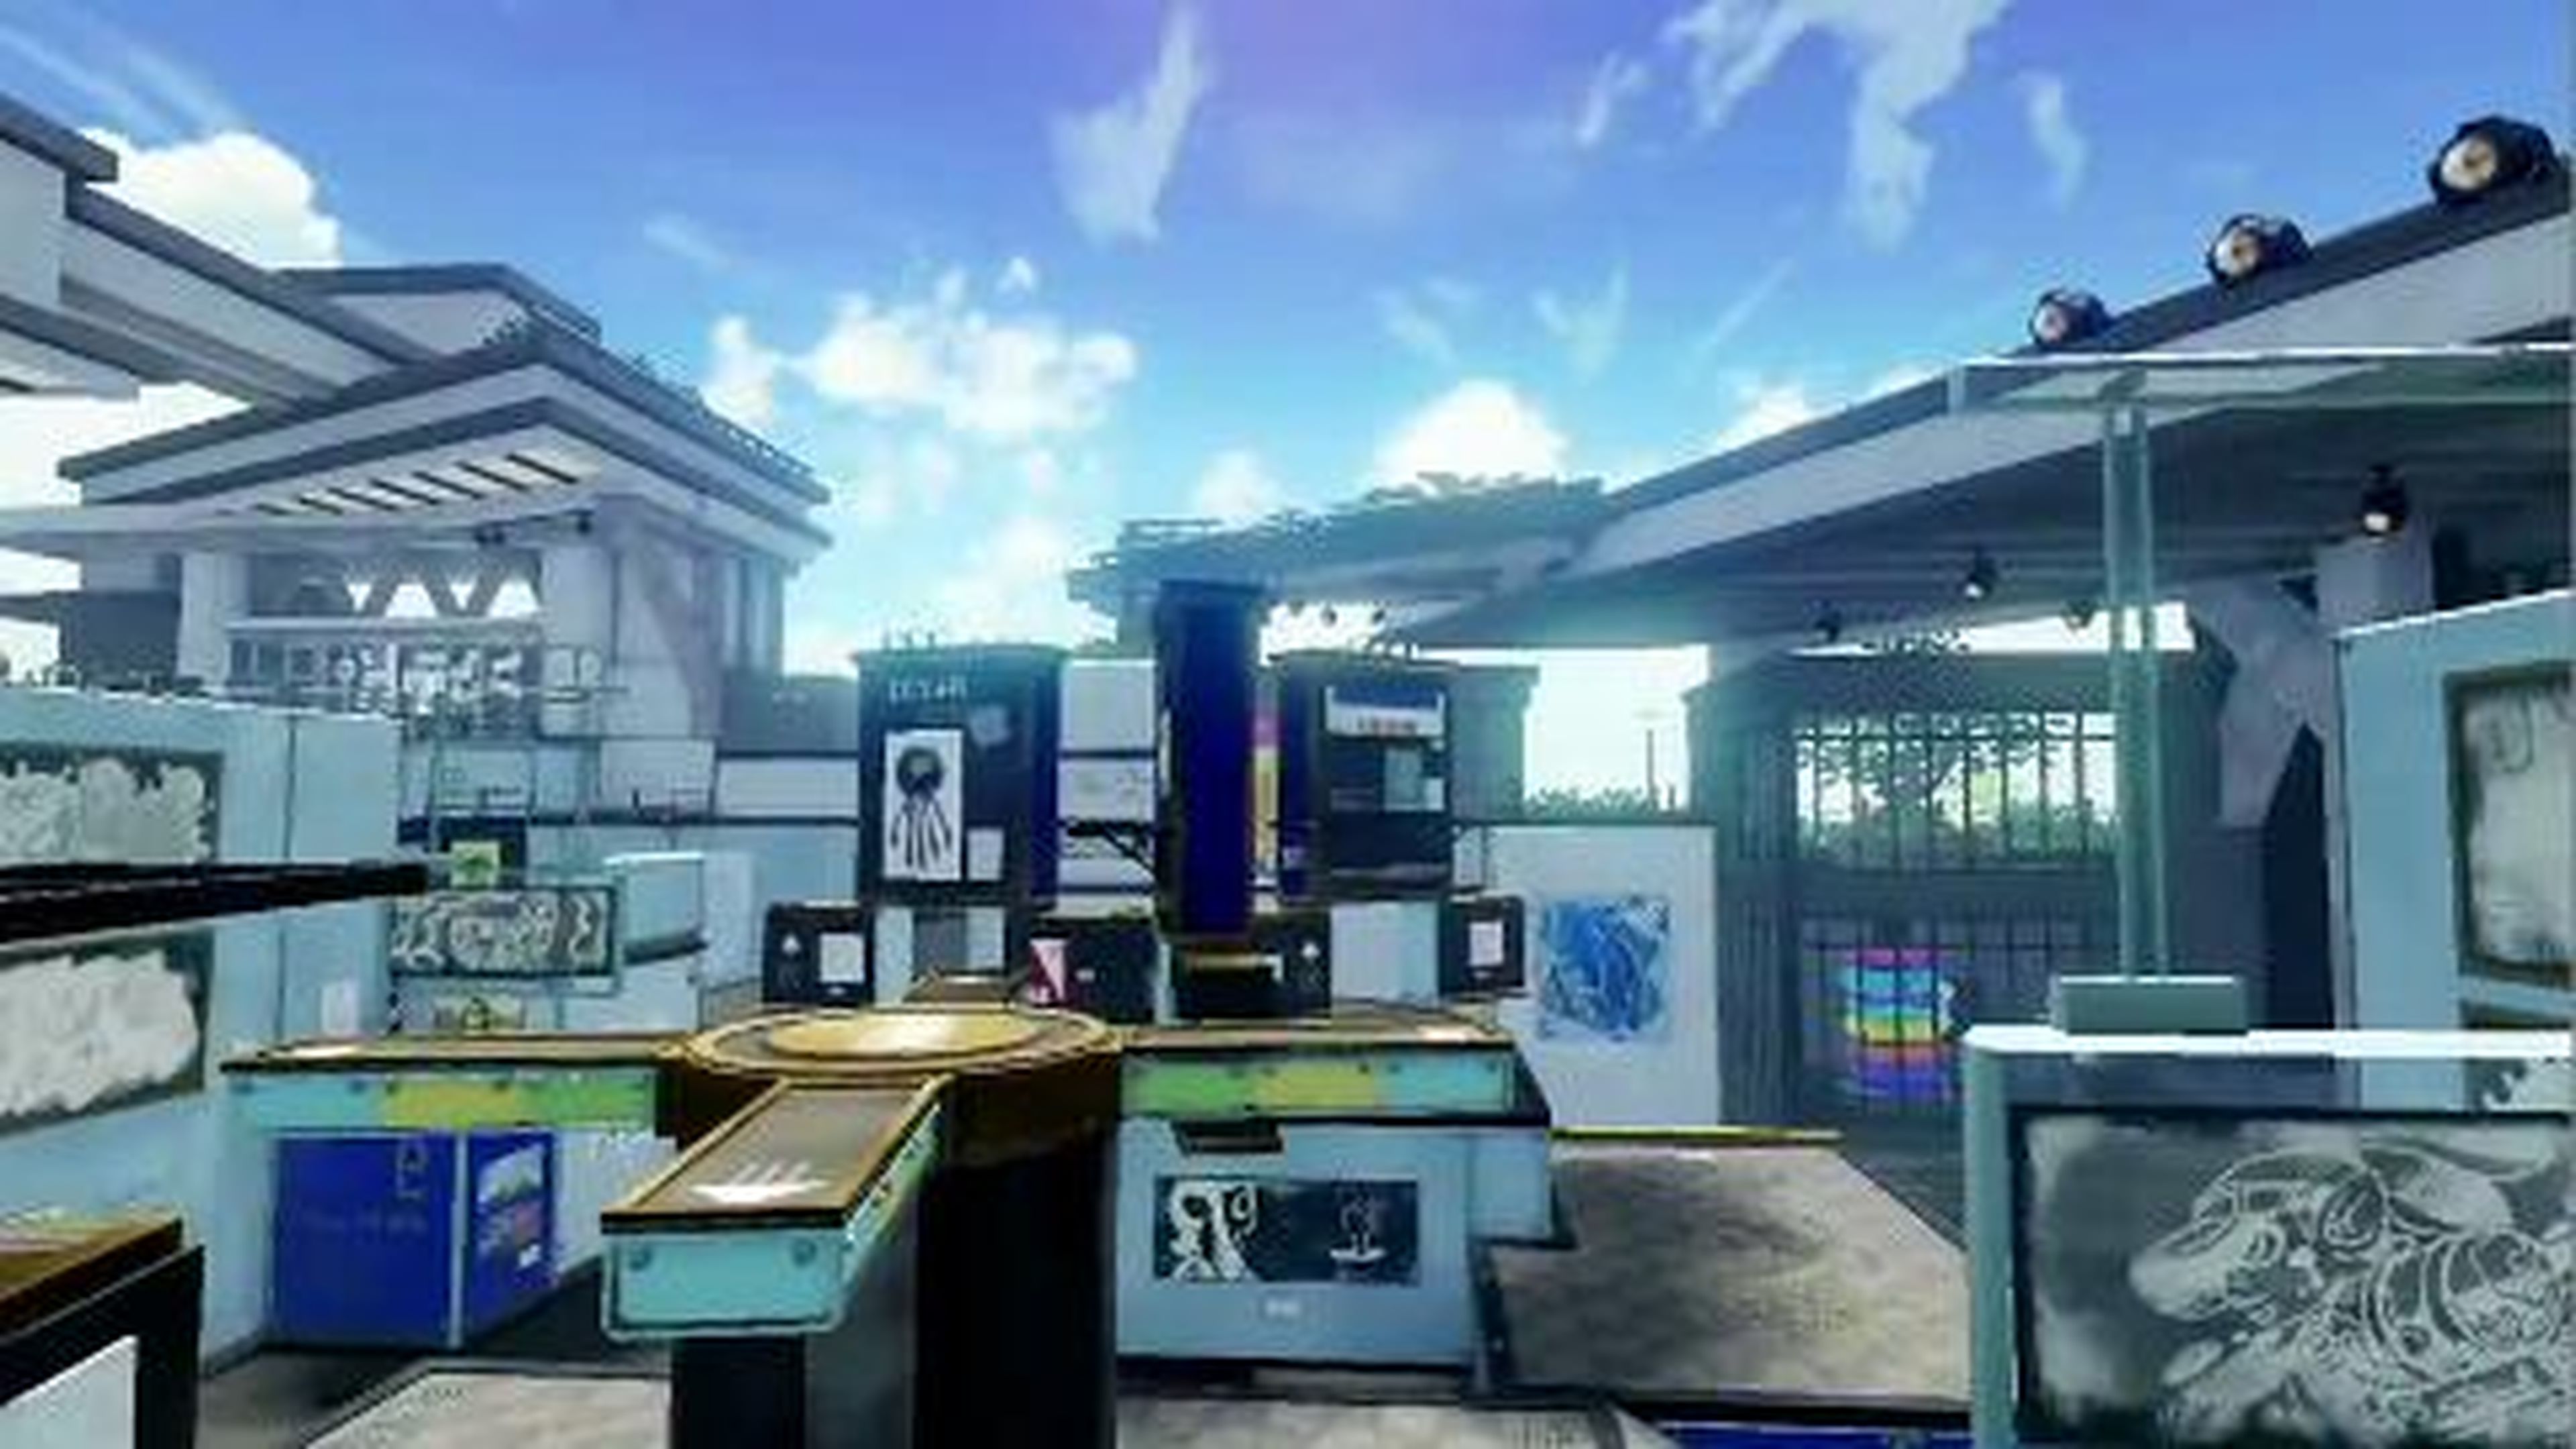 Splatoon - Inkredible New Stages and Gear